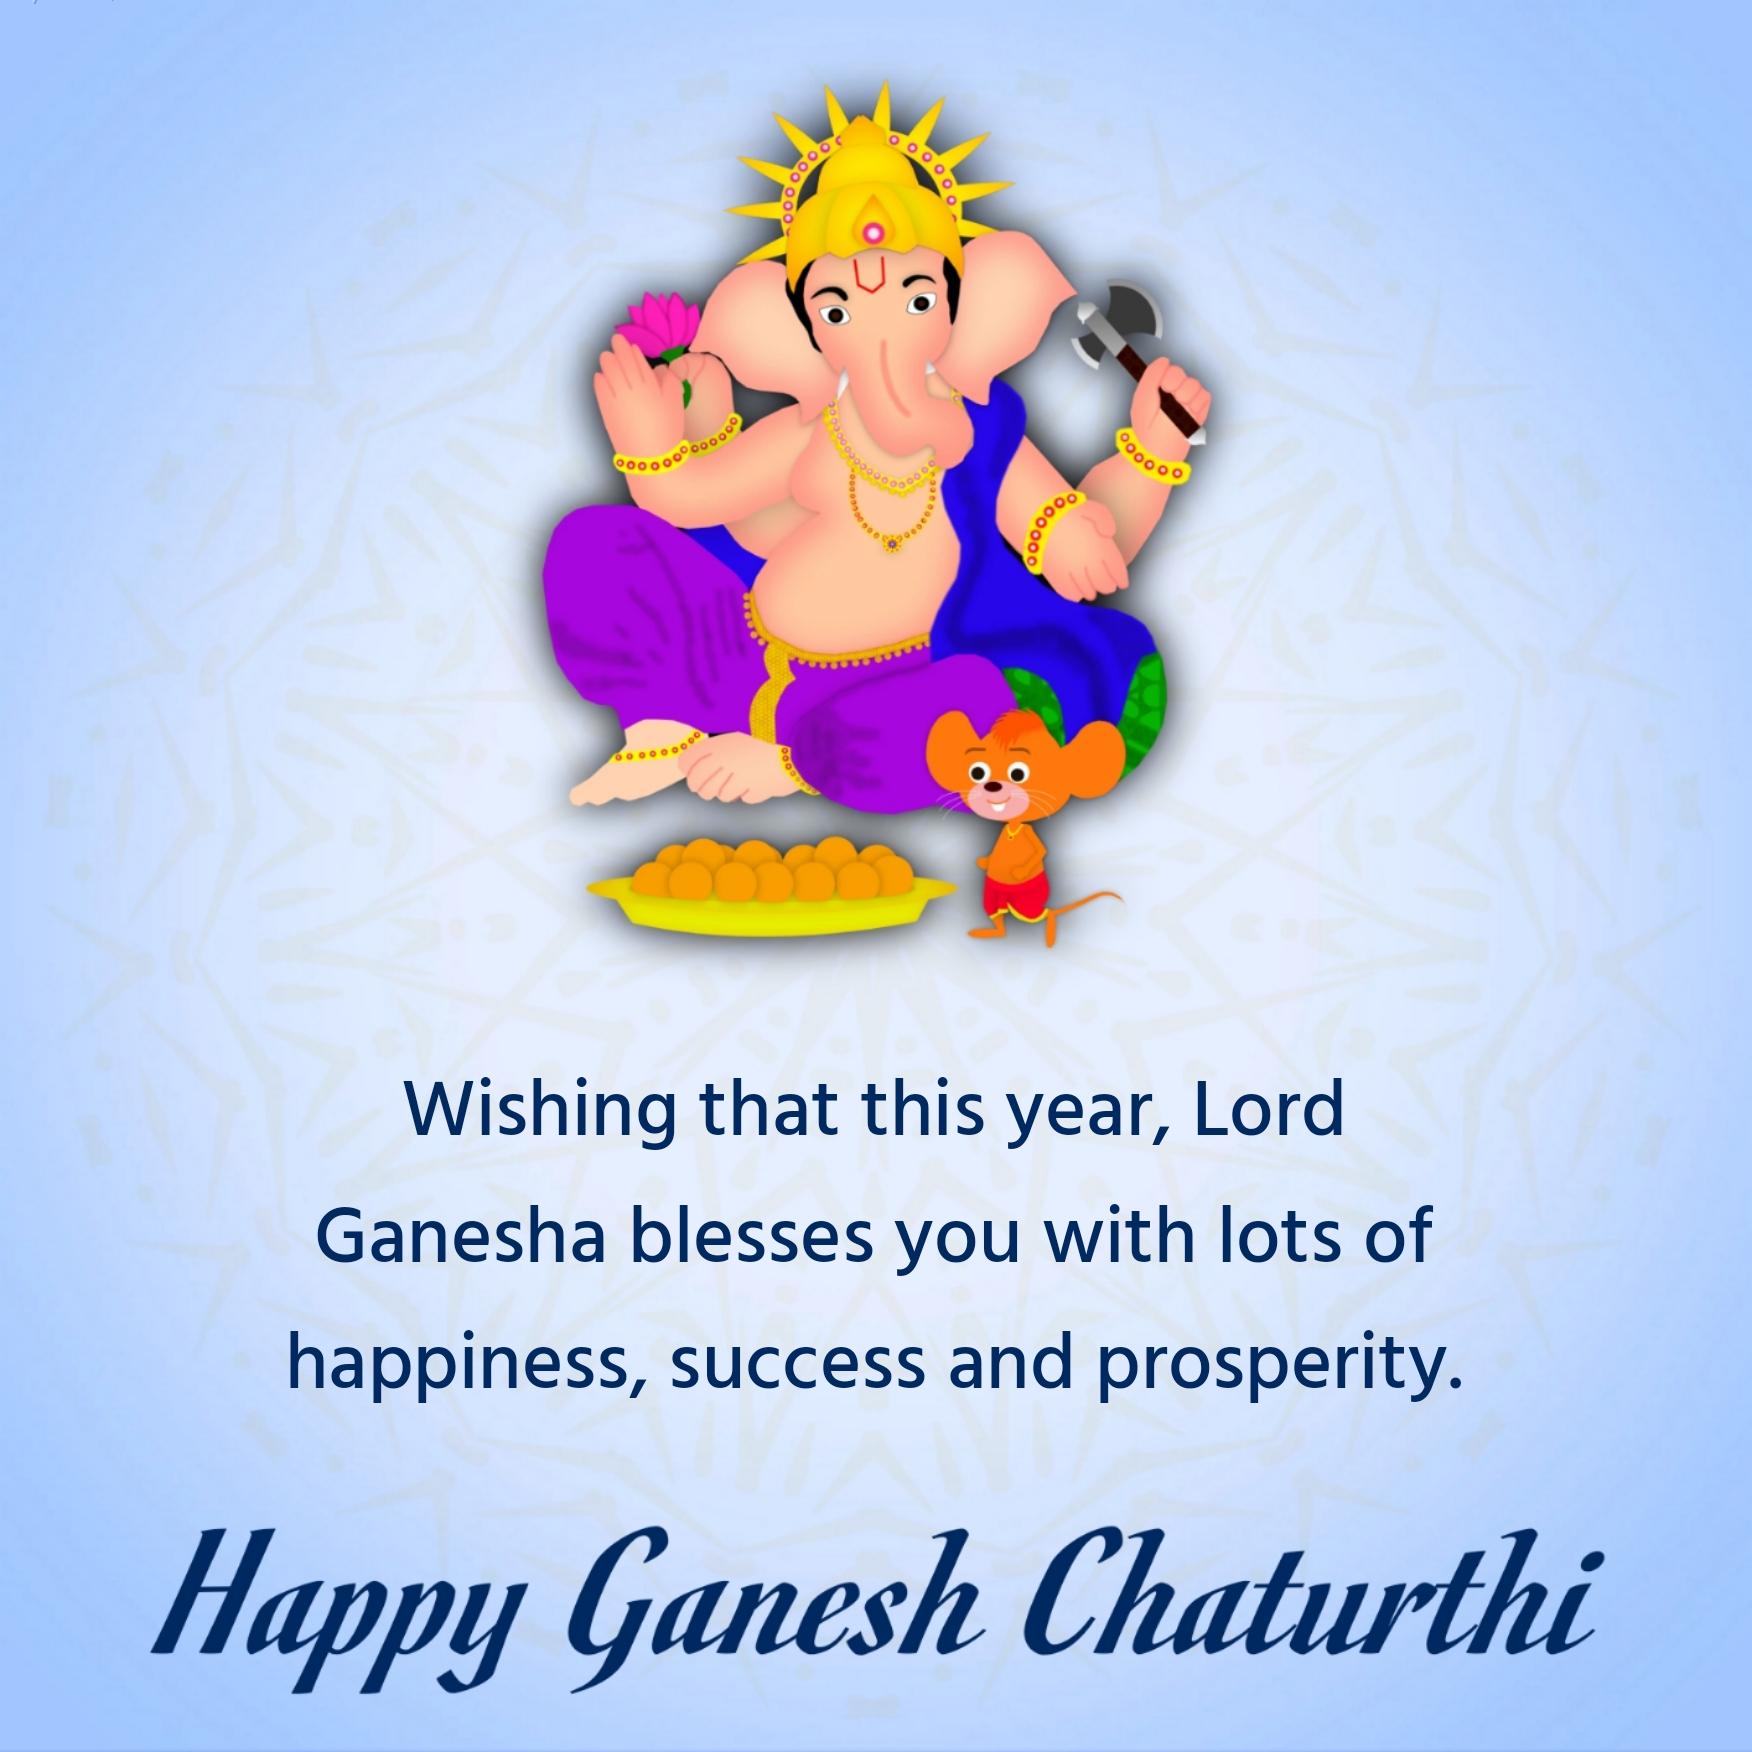 Wishing that this year Lord Ganesha blesses you